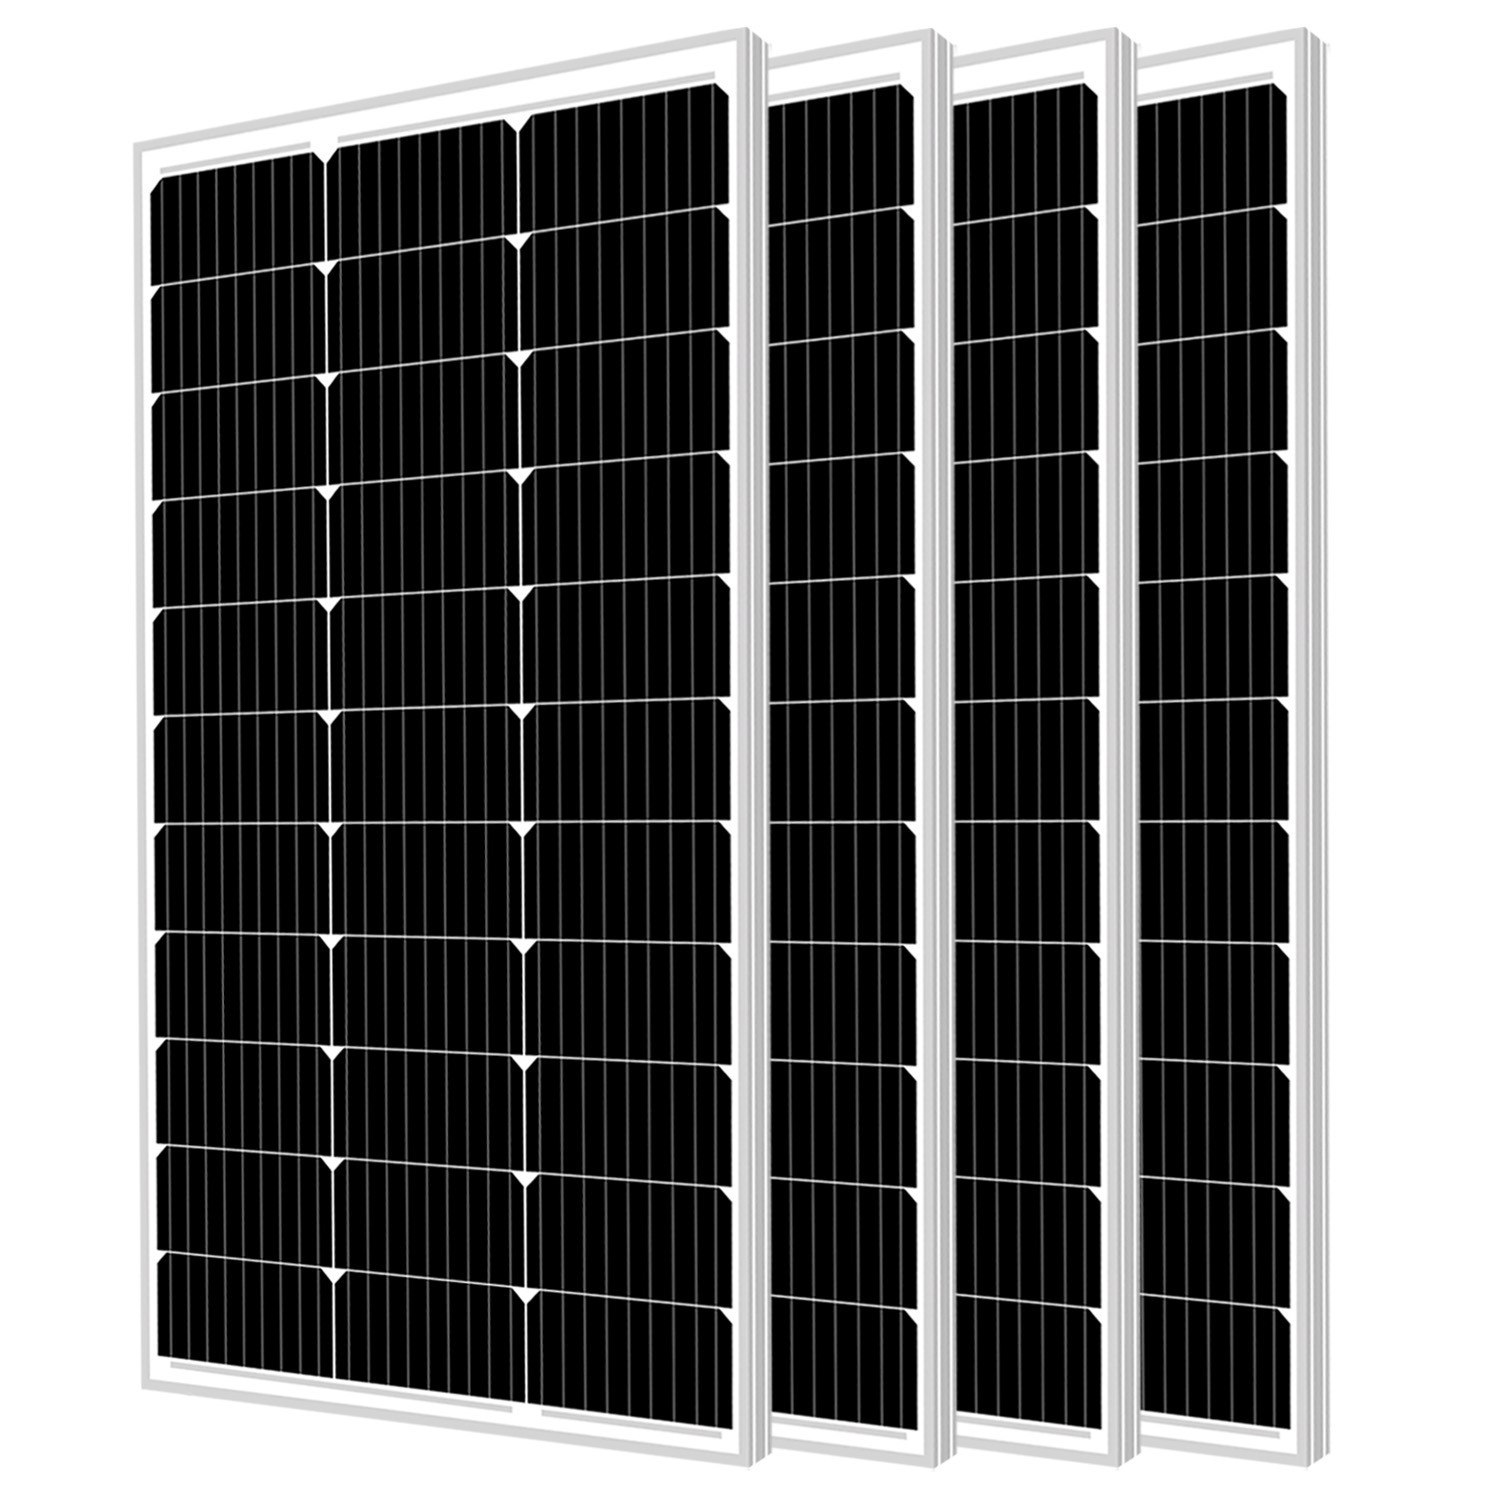 100W Solar Panel 12V Mono Off Grid Battery Charger for RV Marine Rooftop Farm - 4 Pack